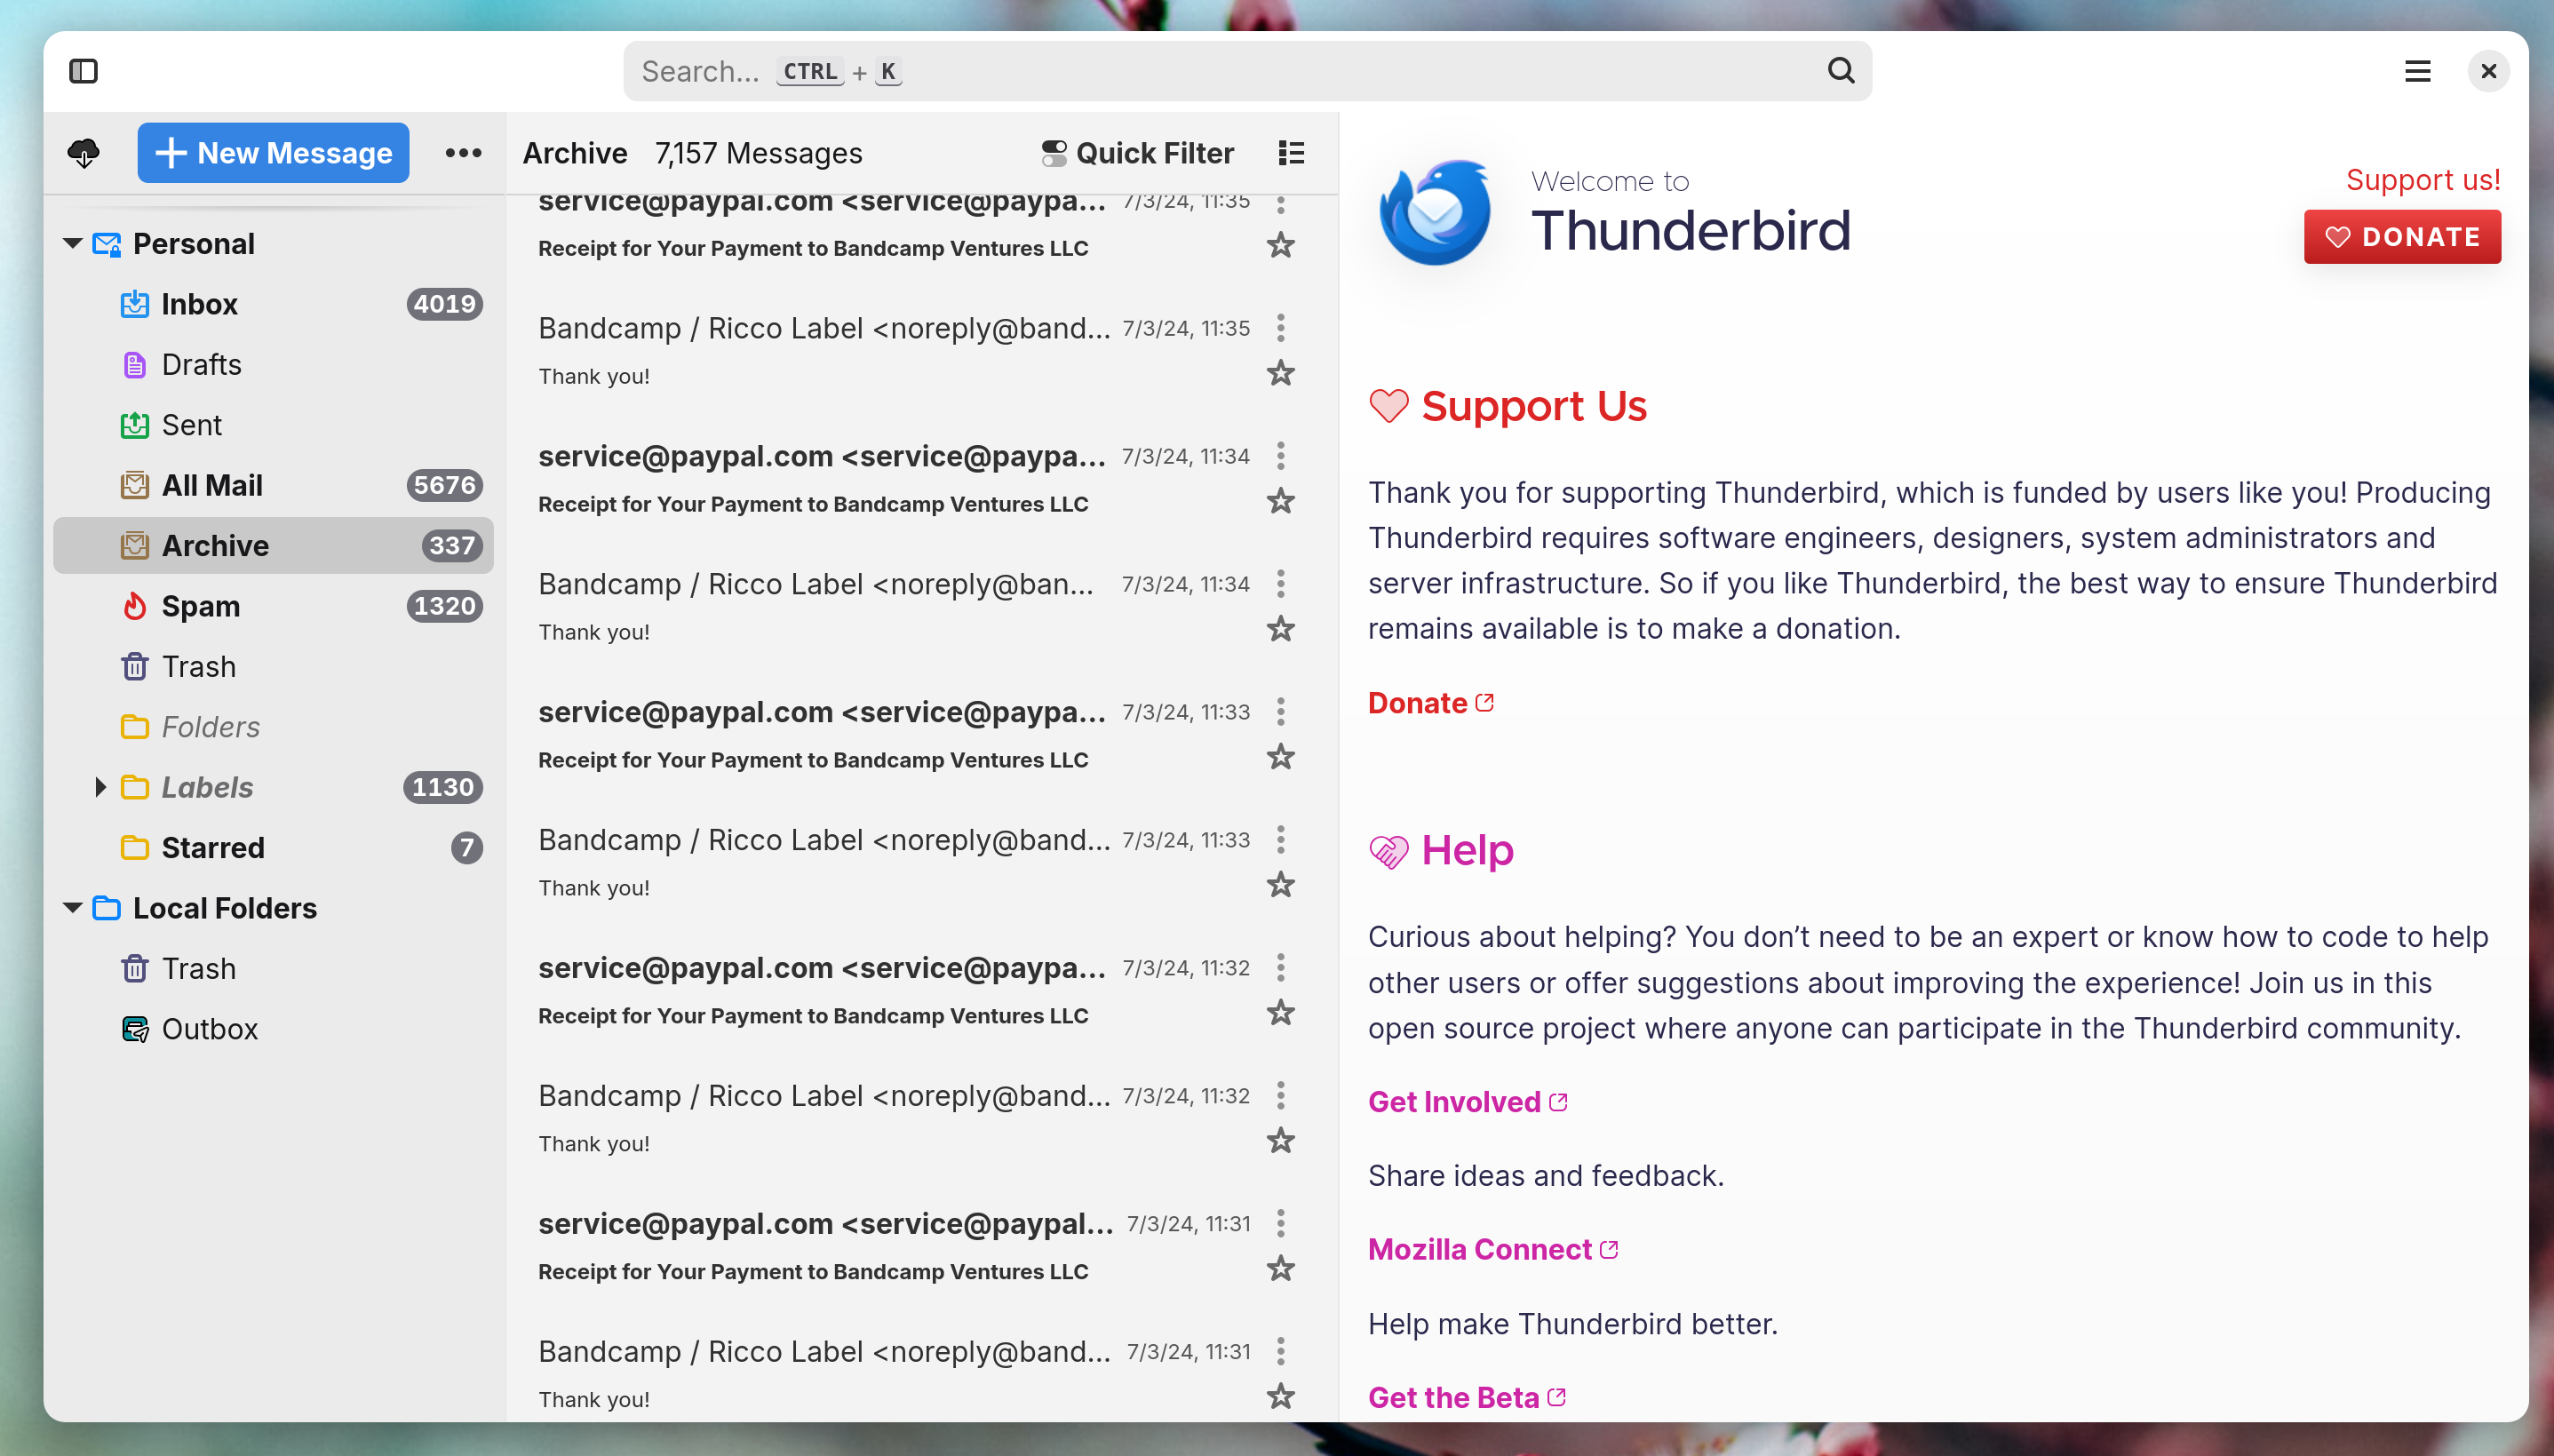 Thunderbird email client with GNOME theme installed on Linux.